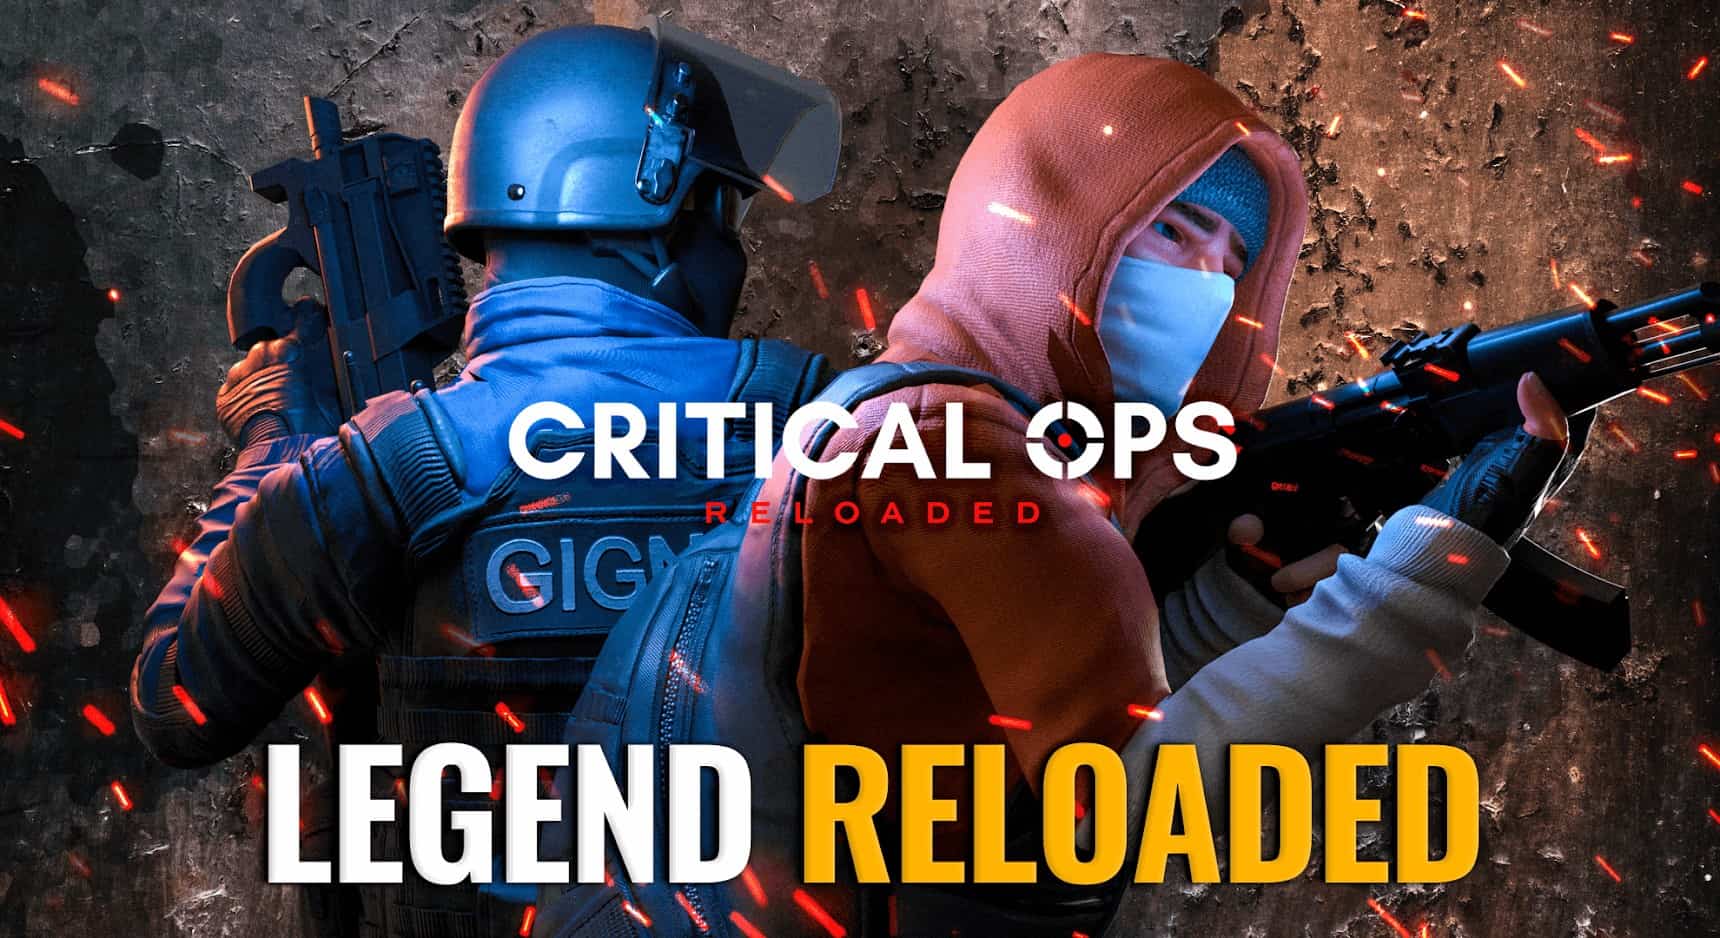 critical ops pc download 2020